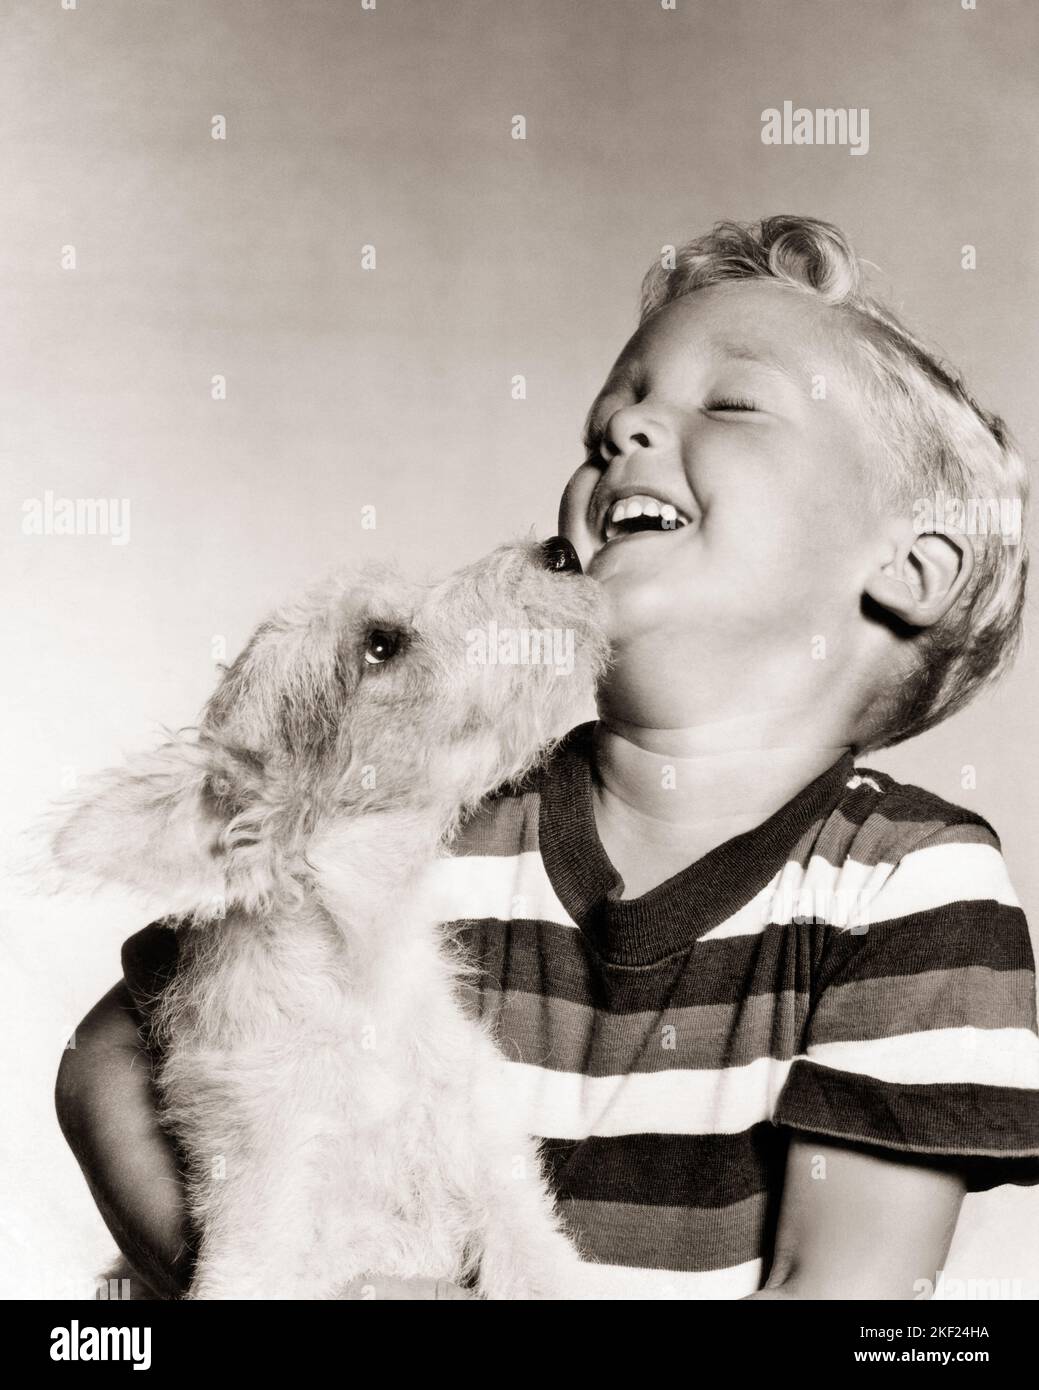 1940s 1950s SMILING LAUGHING BOY BEING LICKED BY PET WIRE HAIRED TERRIER DOG - d2201 HAR001 HARS JOY STRIPED STUDIO SHOT RURAL HEALTHINESS HOME LIFE COPY SPACE FRIENDSHIP HALF-LENGTH CARING MALES PETS B&W TERRIER LICKING HAPPINESS MAMMALS CANINES TO HAIRED CONNECTION CONCEPTUAL JOYFUL T-SHIRT MUTT CANINE JUVENILES MAMMAL TEE SHIRT TICKLE TOGETHERNESS BLACK AND WHITE CAUCASIAN ETHNICITY HAR001 OLD FASHIONED Stock Photo